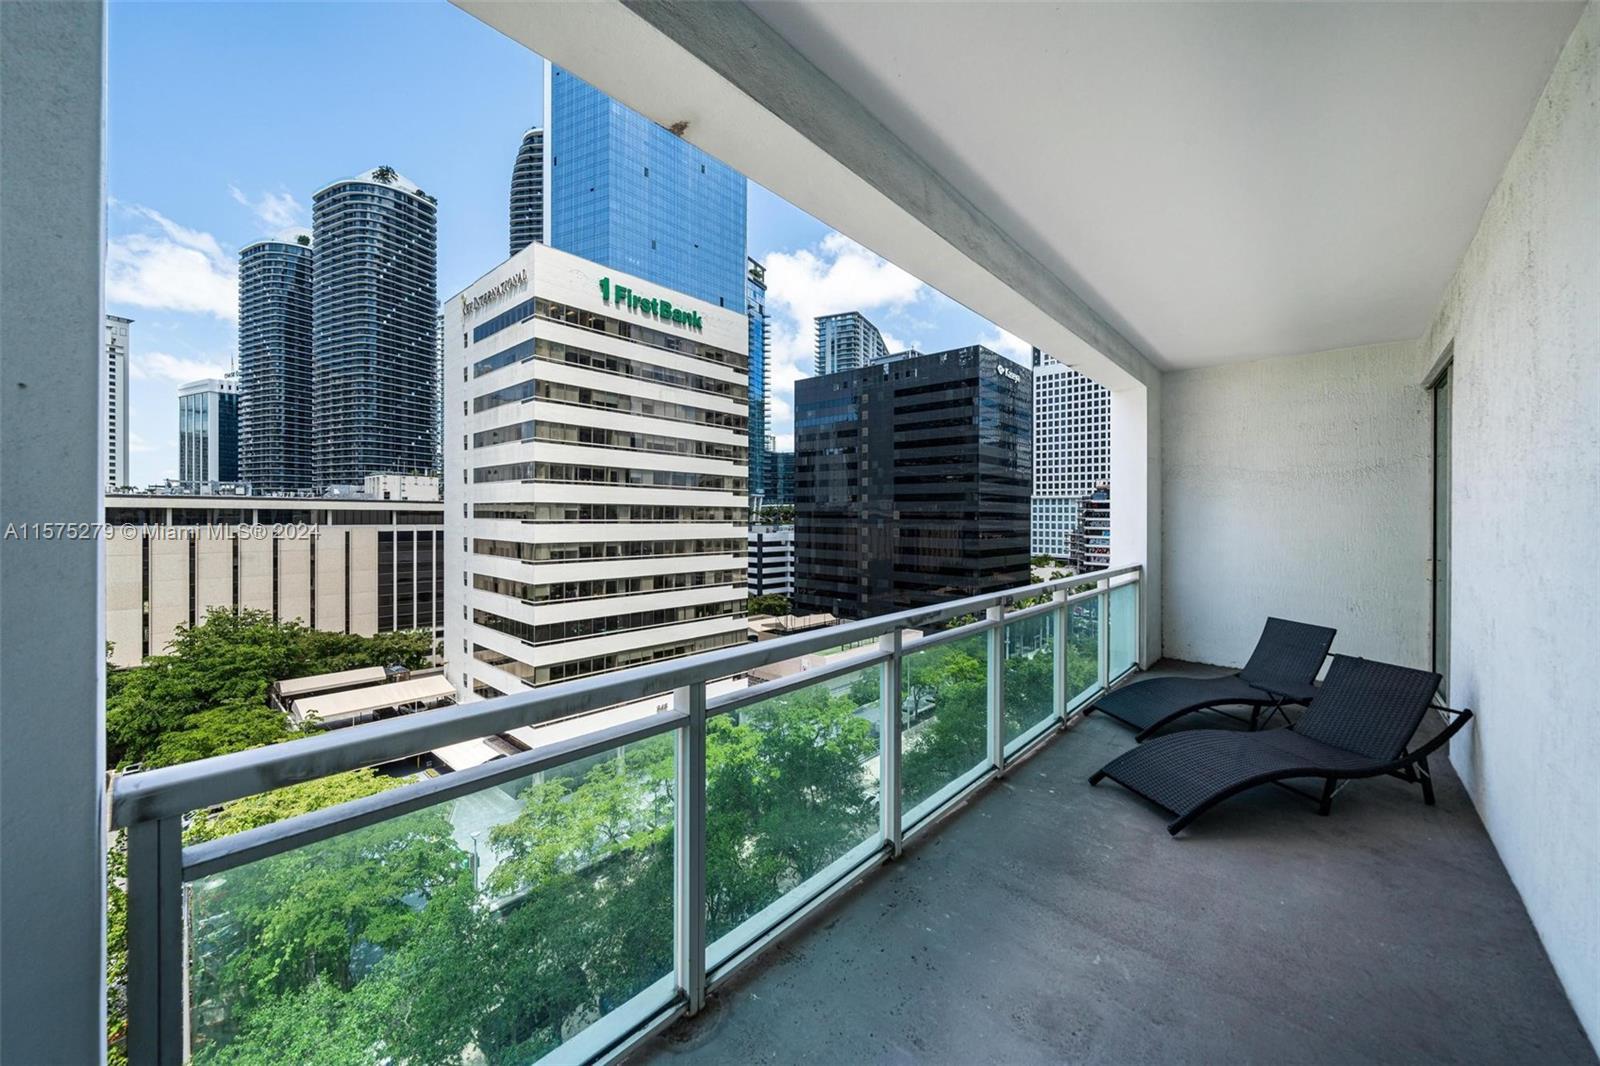 Experience luxury living at the Plaza! This 1-bed/1-bath unit showcases stunning skyline views and b